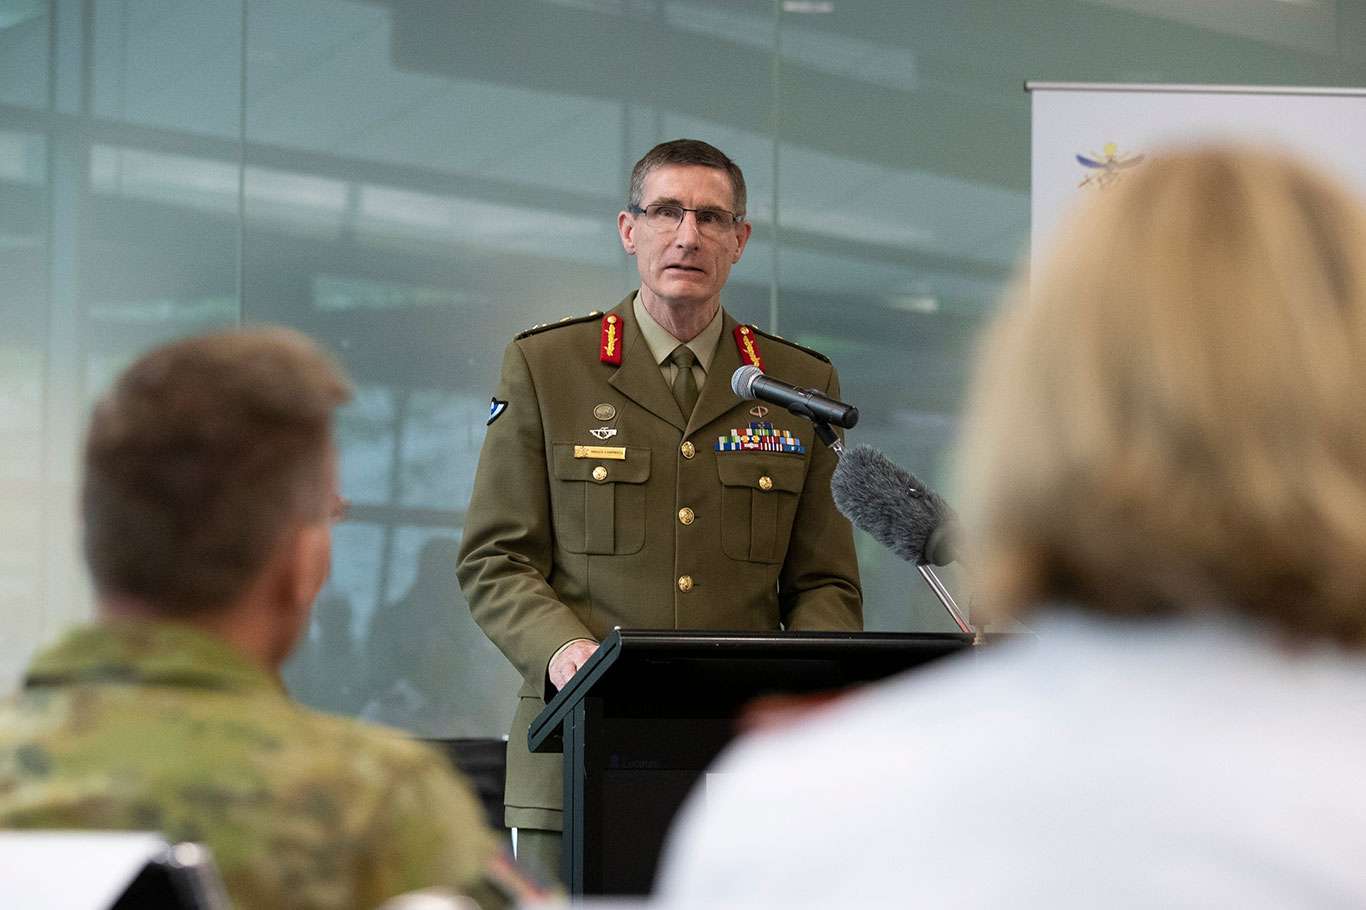 Australian troops kill at least 39 non-combatants in Afghanistan, inquiry reveals